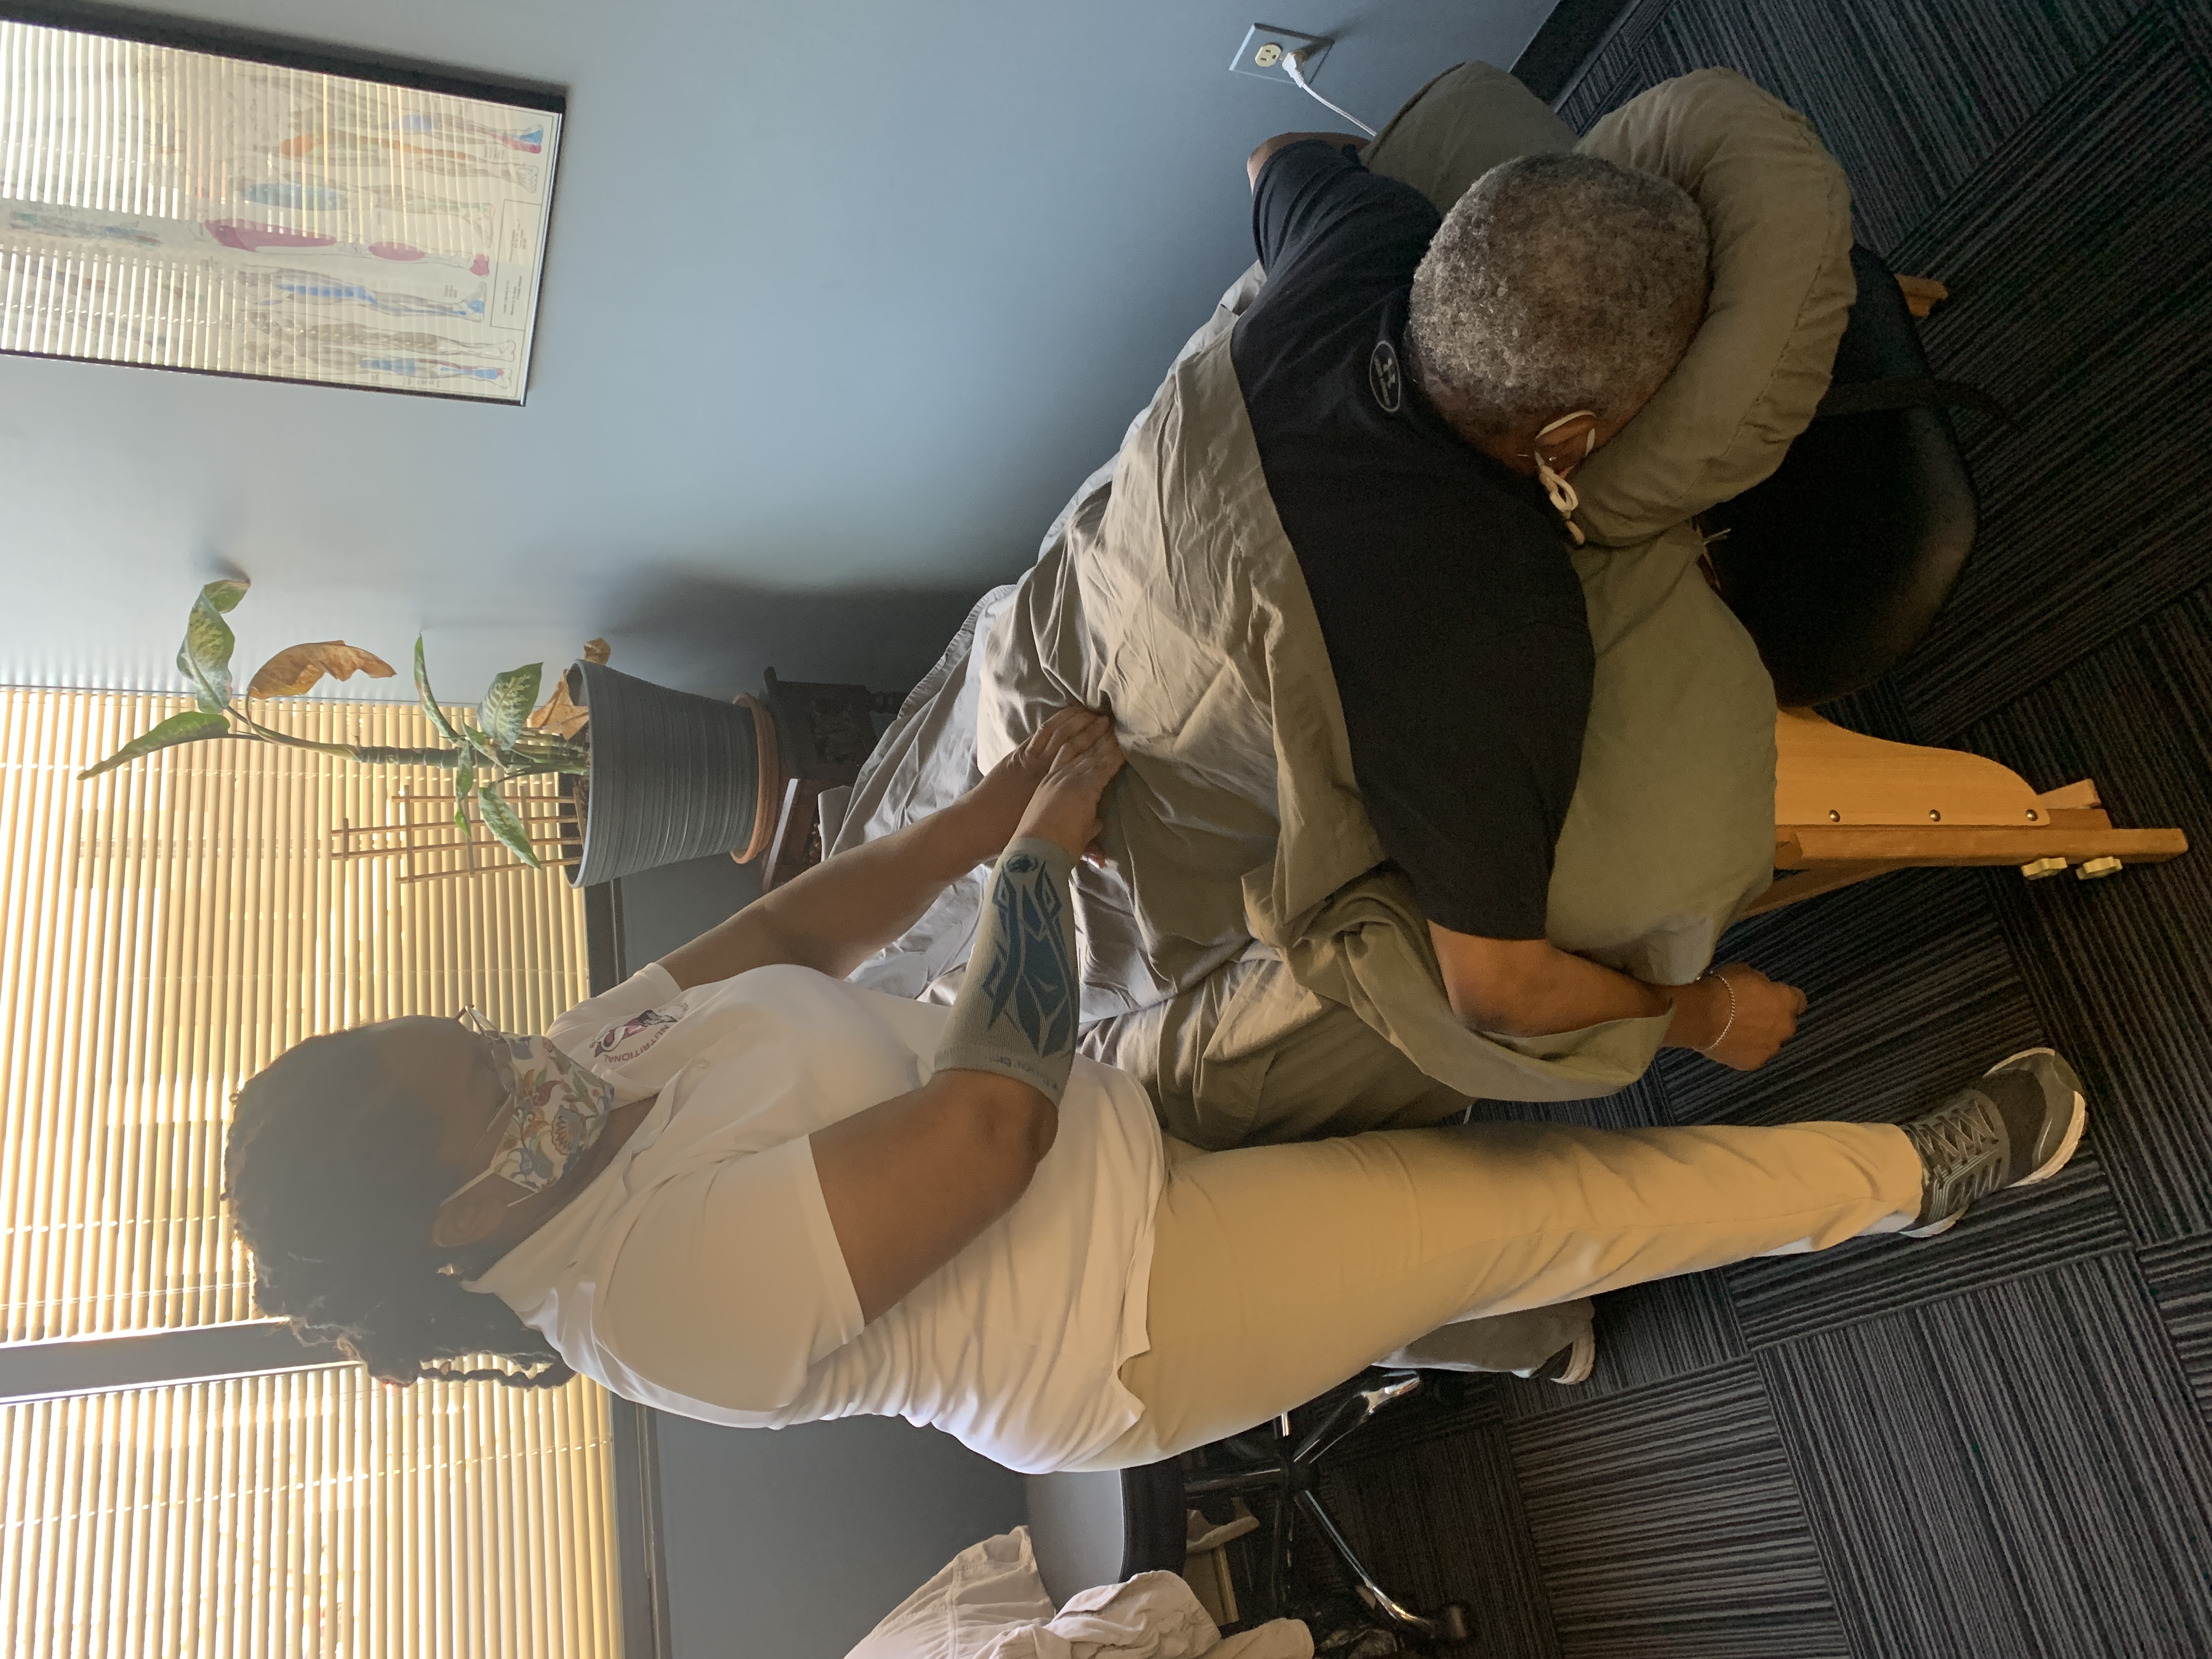 Administering Massage Therapy to a Patient